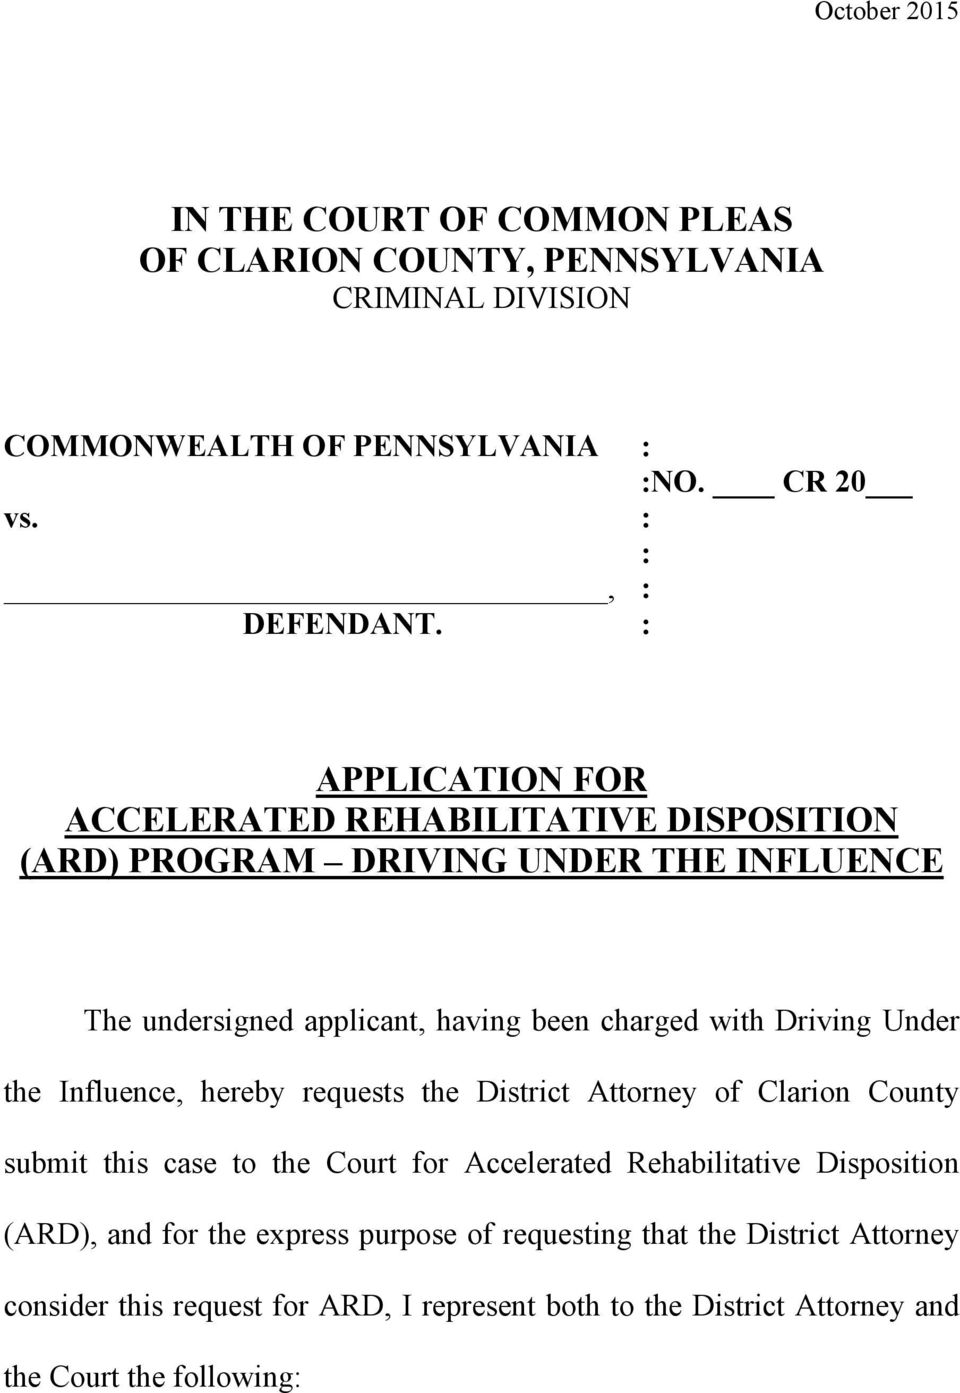 Driving Under the Influence, hereby requests the District Attorney of Clarion County submit this case to the Court for Accelerated Rehabilitative Disposition